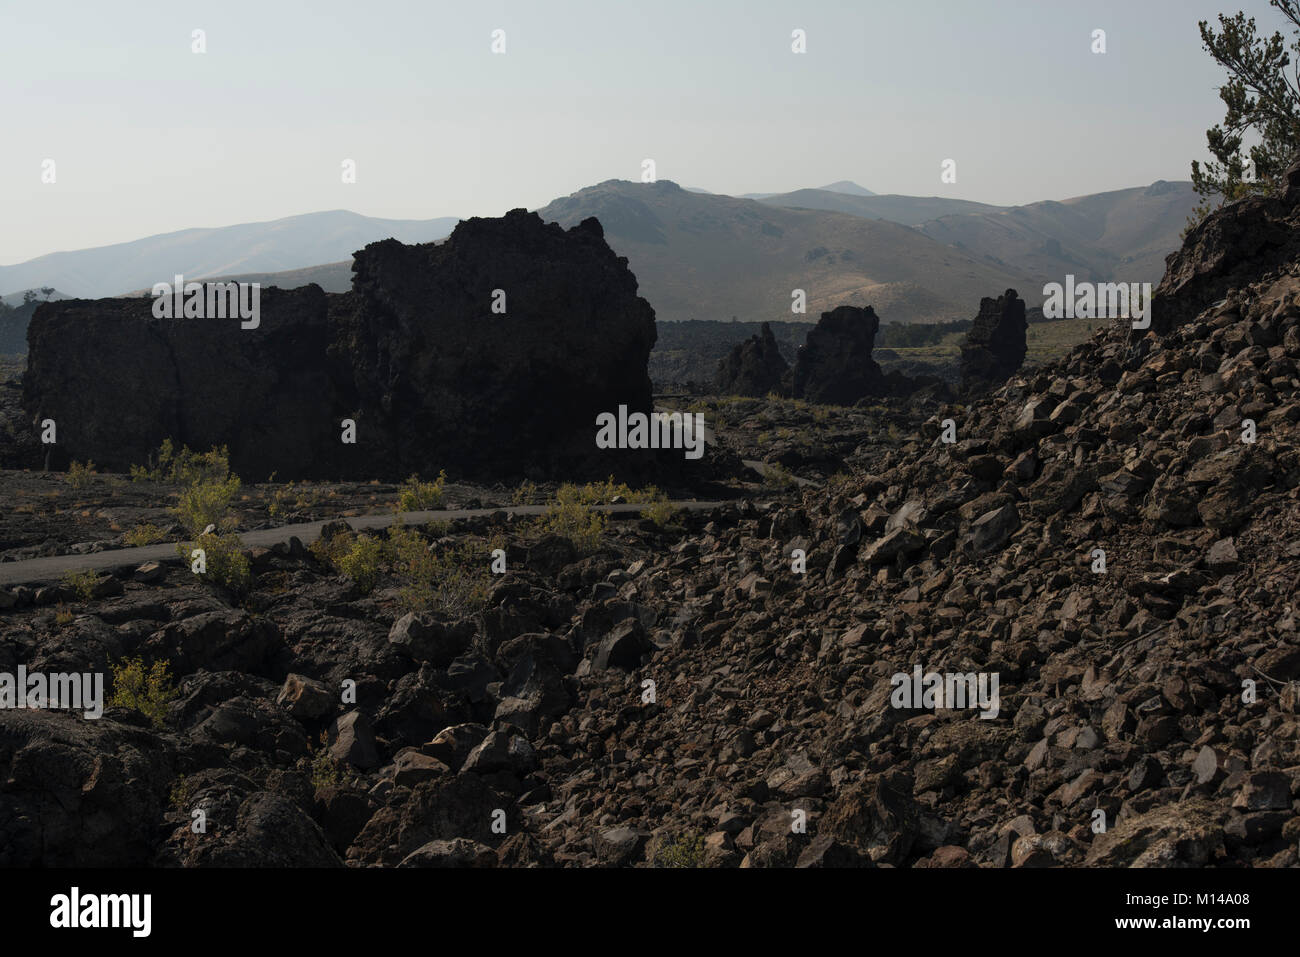 Monoliths and crater fragments along the North crater flow ield at Craters of the Moon Natl. Monument and Preserve, Idaho, USA Stock Photo